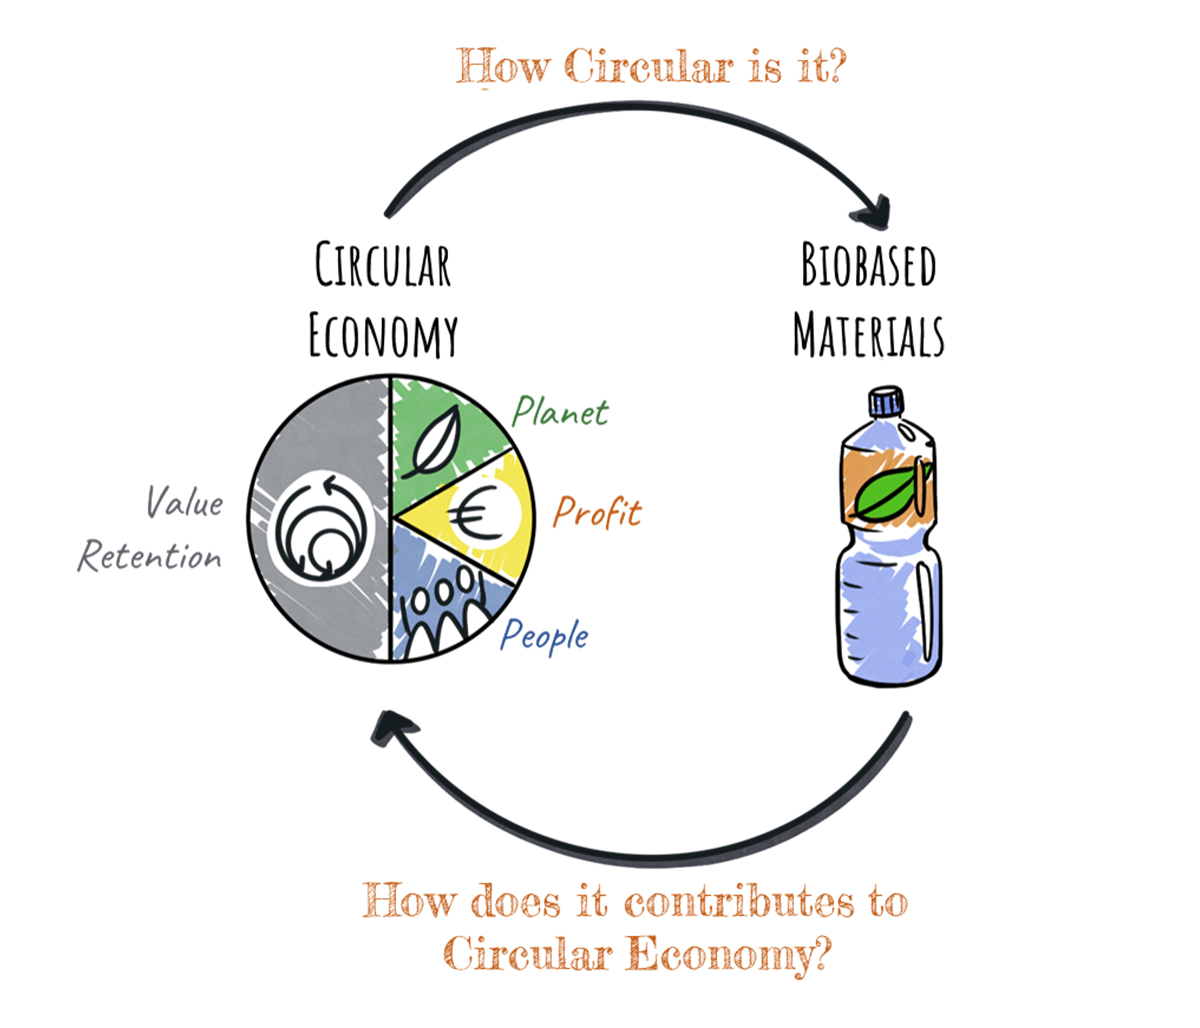 Sustainability of biobased materials in a circular economy